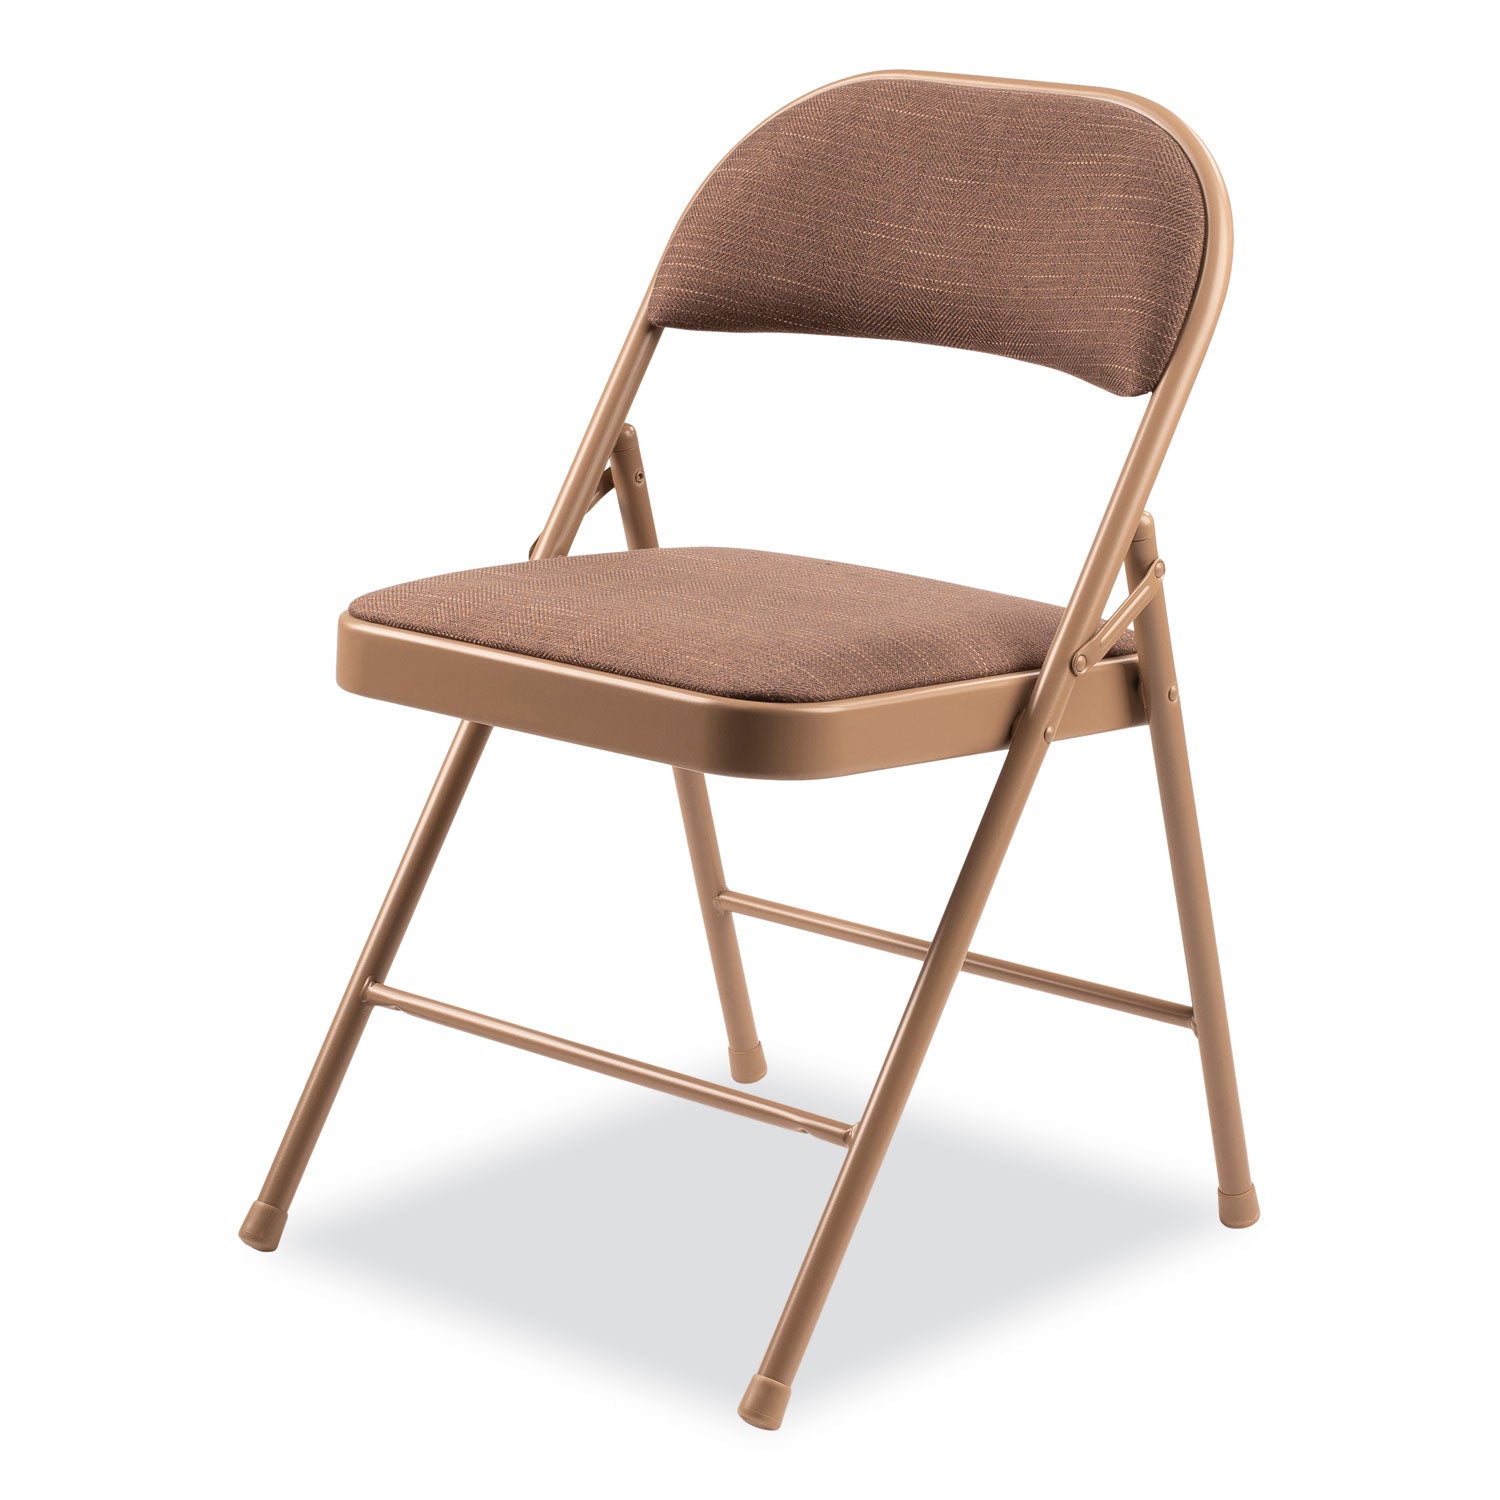 970-series-fabric-padded-steel-folding-chair-supports-250-lb-1775-seat-ht-star-trail-brown-4-ct-ships-in-1-3-bus-days_nps973 - 3